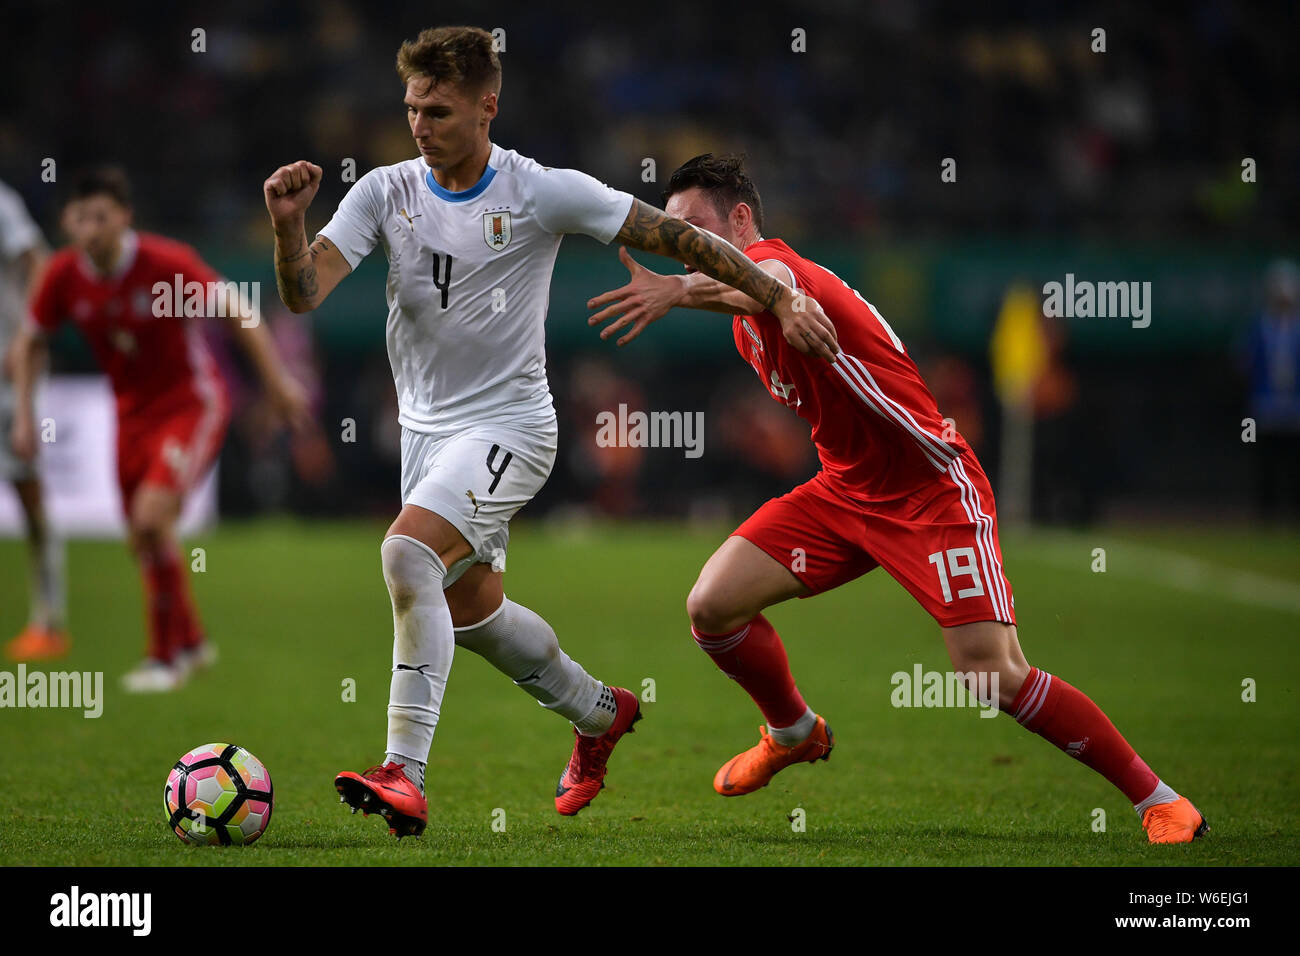 Guillermo Varela, left, of Uruguay national football team kicks the ball to make a pass against Connor Roberts of Wales national football team in thei Stock Photo